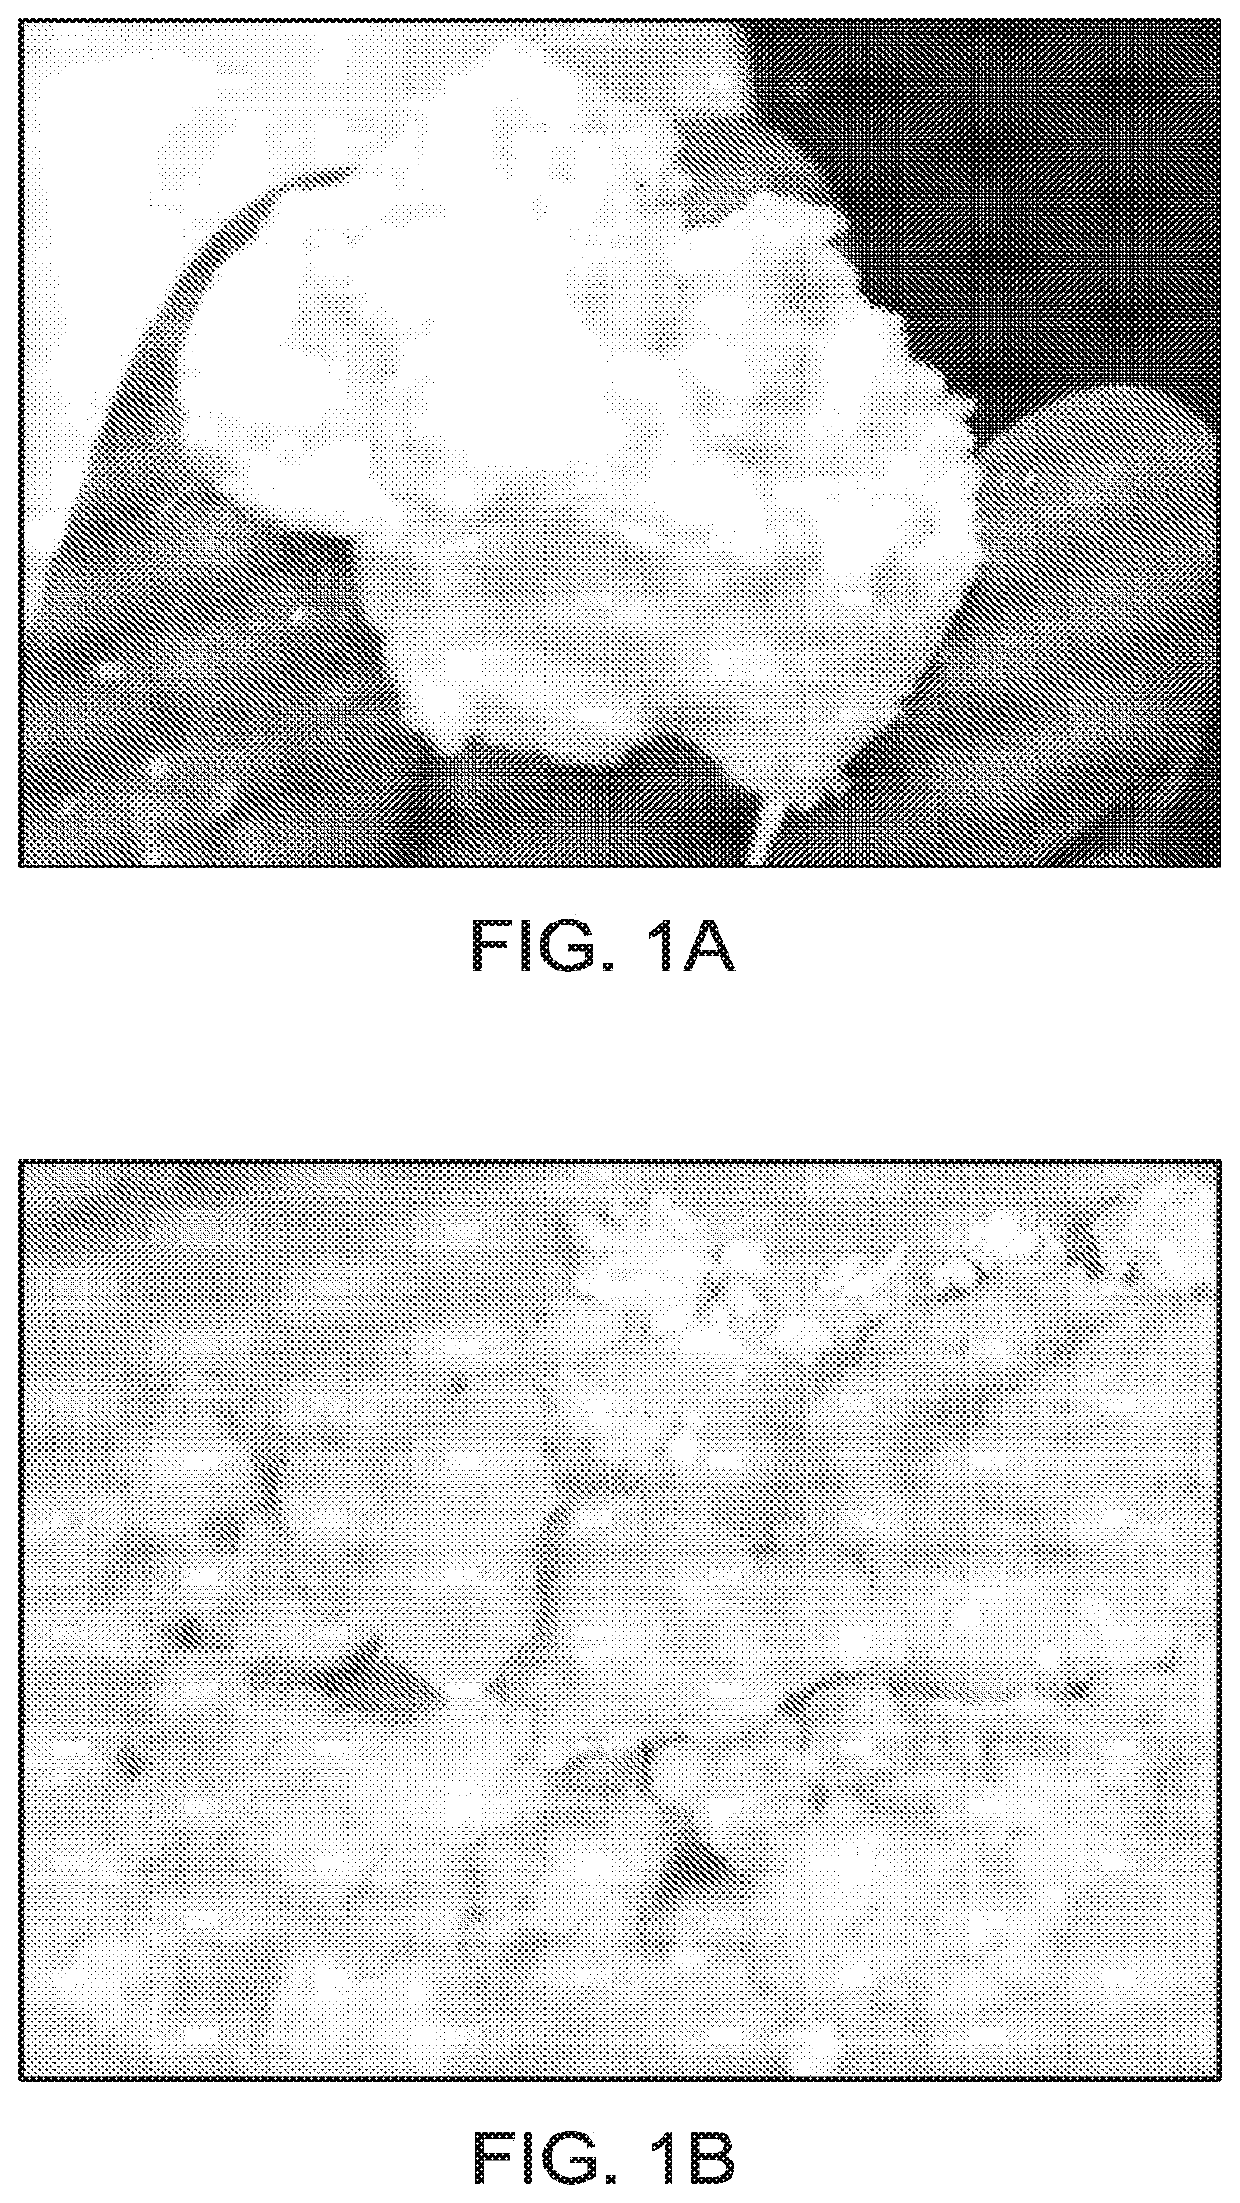 Nanosilica dispersion for thermally insulating packer fluid